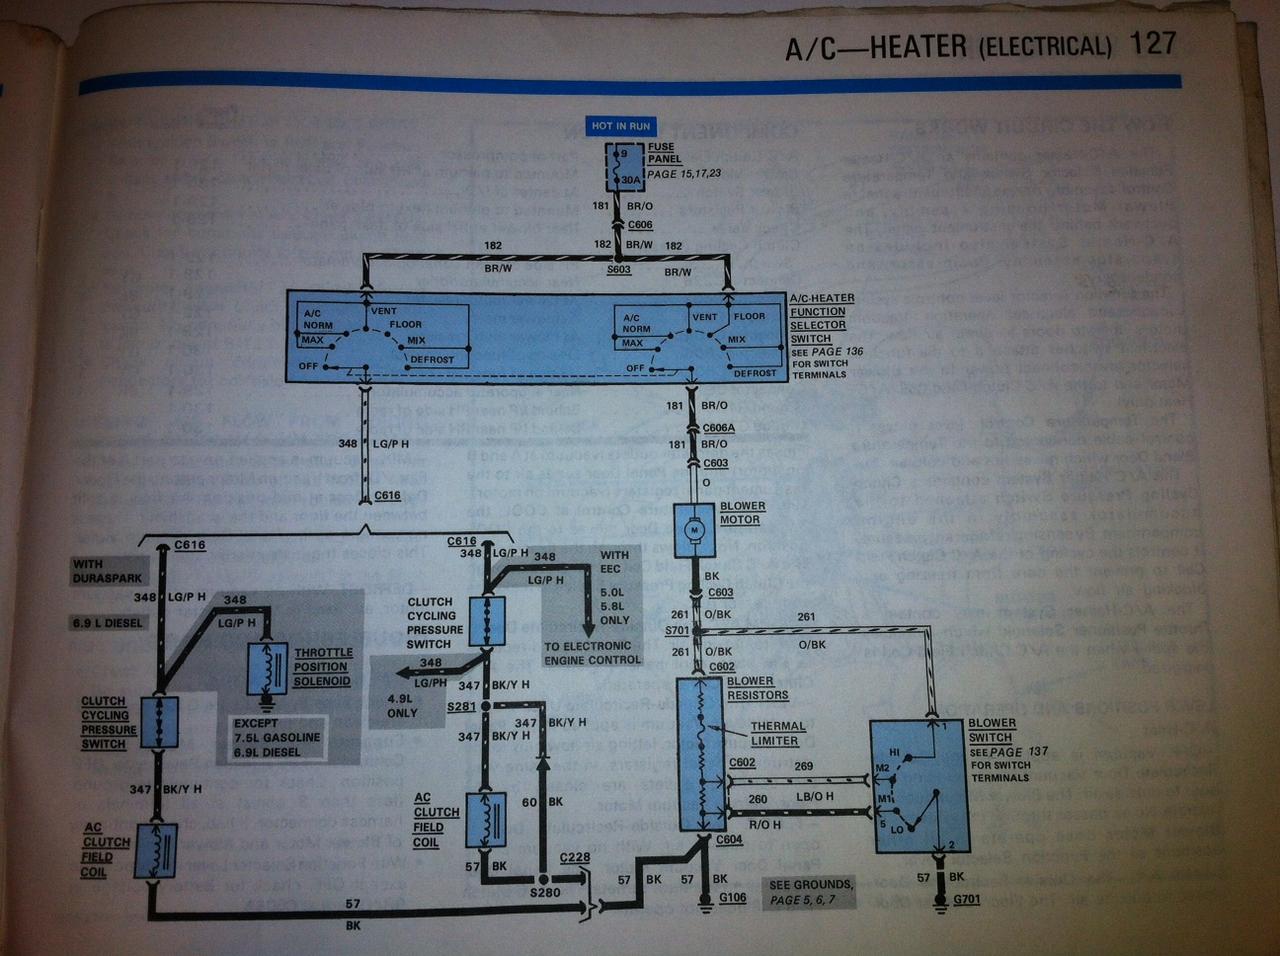 Wiring schematic for a/c -heat on a 1984 F250 Diesel ... 1984 ford 1710 wiring diagram 